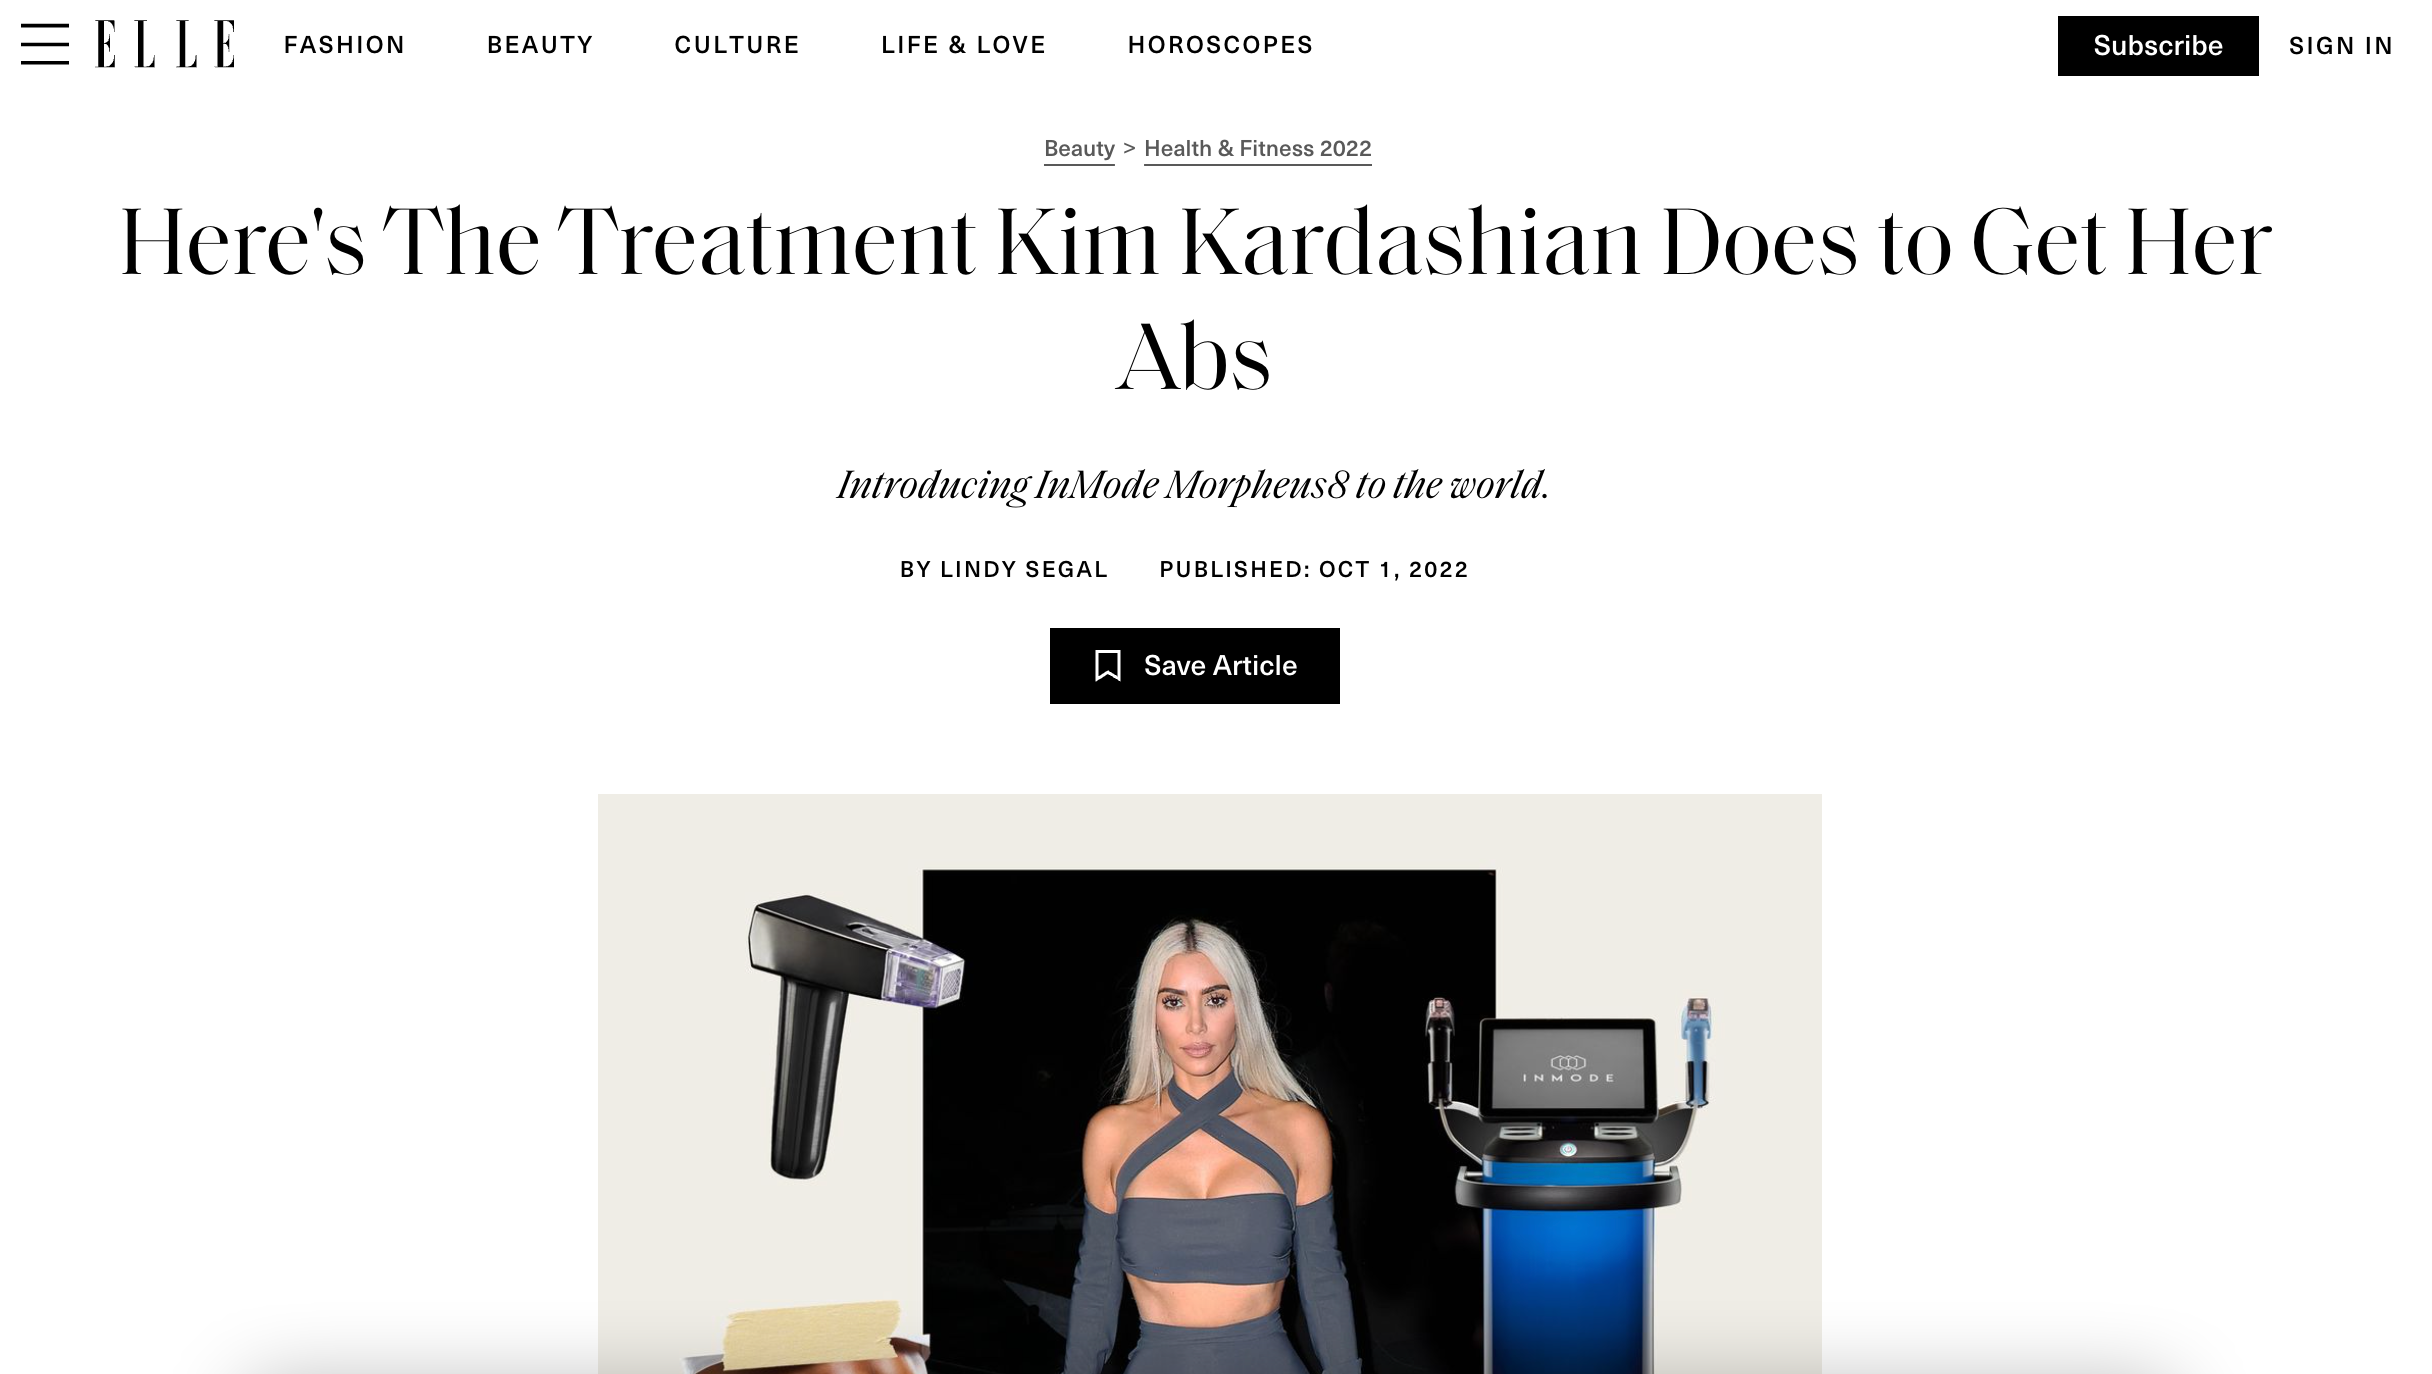 InMode In The Press: ‘This Is a Game Changer’ — Kim K on InMode’s Morpheus8